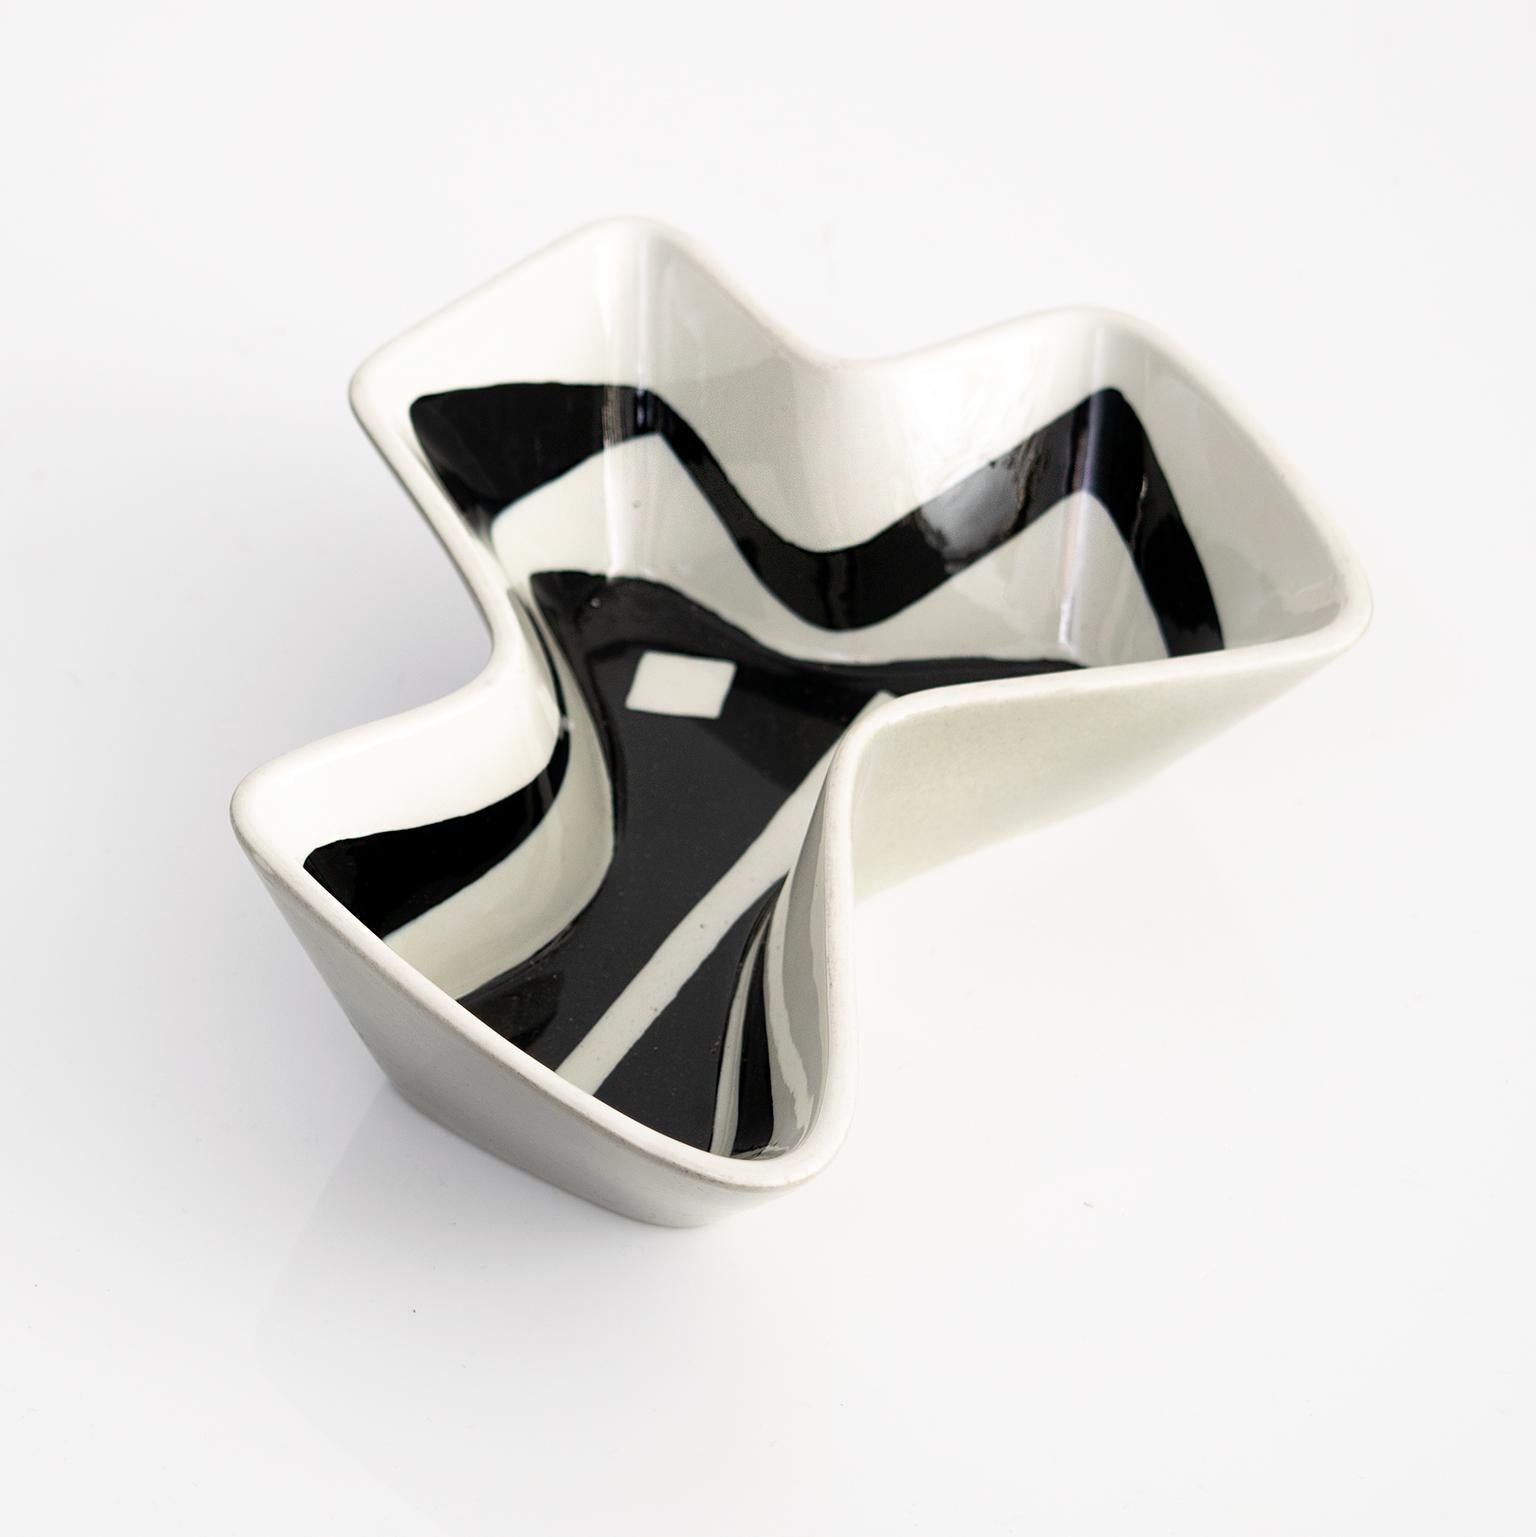 Carl-Harry Stalhane Geometric Bowl and Vase, Rorstrand, Sweden 1950 For Sale 3